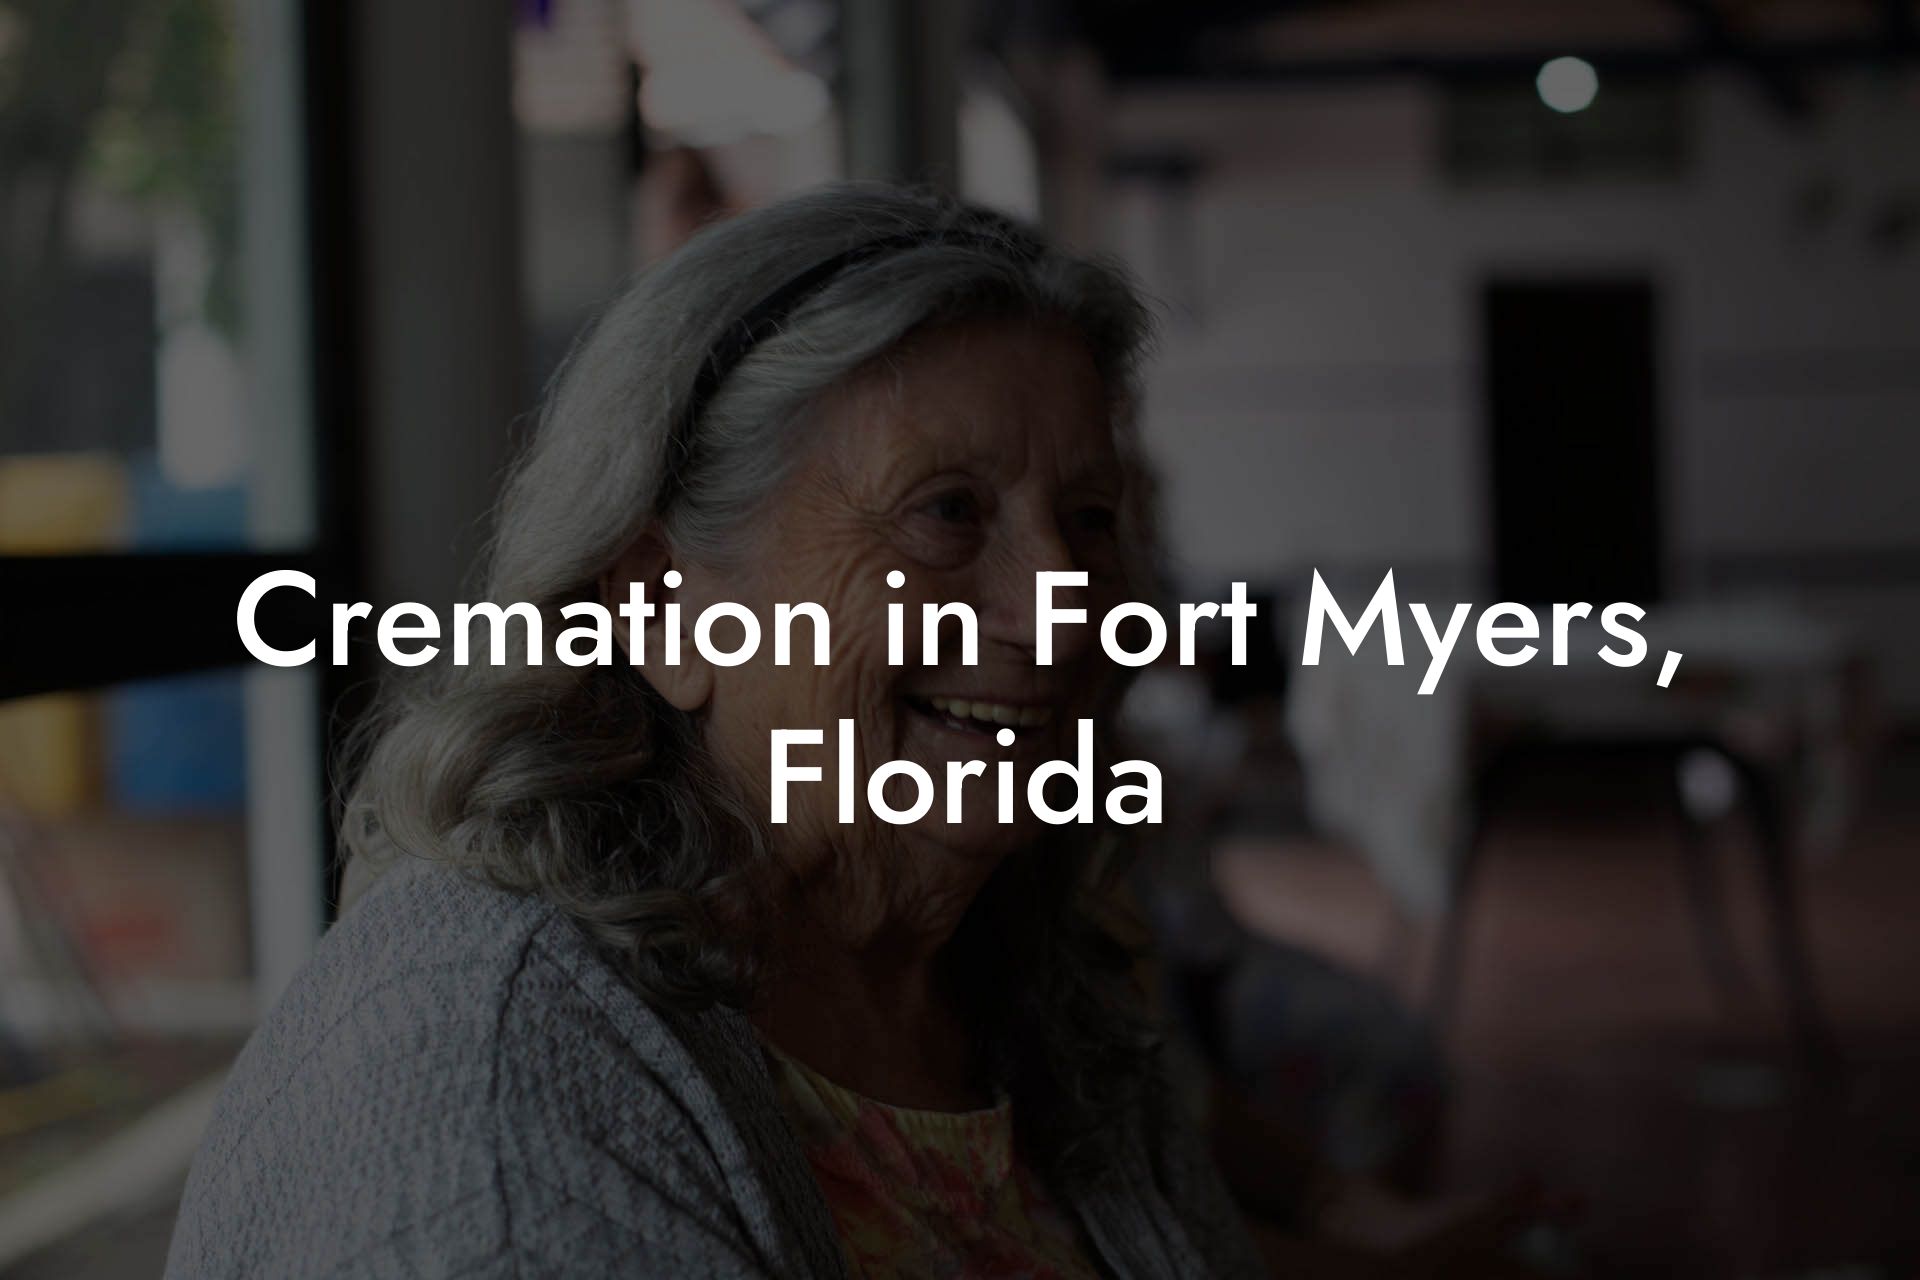 Cremation in Fort Myers, Florida